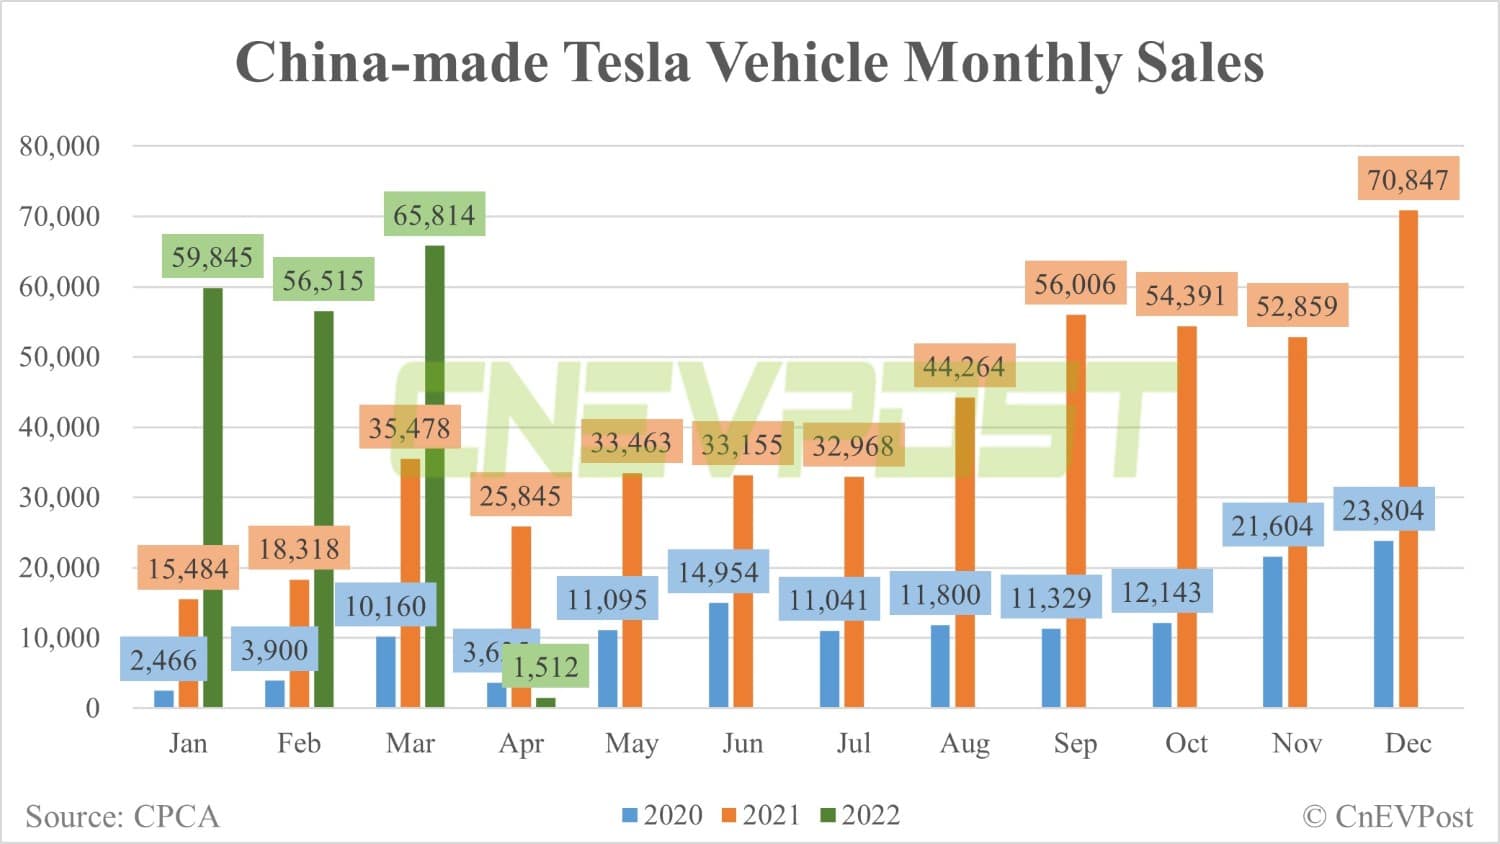 BREAKING: Tesla sells only 1,512 China-made vehicles in April, produces 10,757-CnEVPost